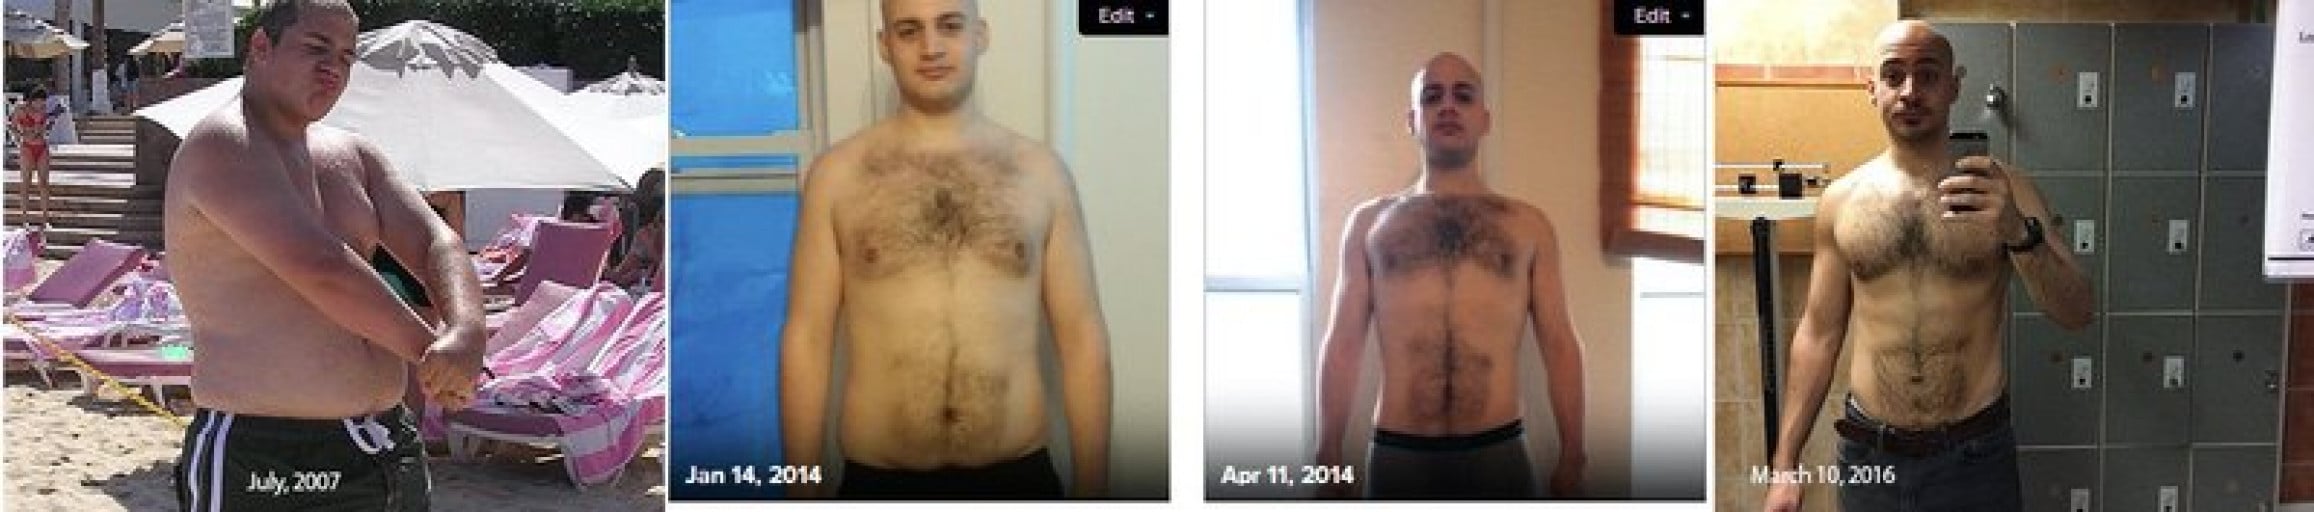 A progress pic of a 6'1" man showing a fat loss from 283 pounds to 183 pounds. A total loss of 100 pounds.